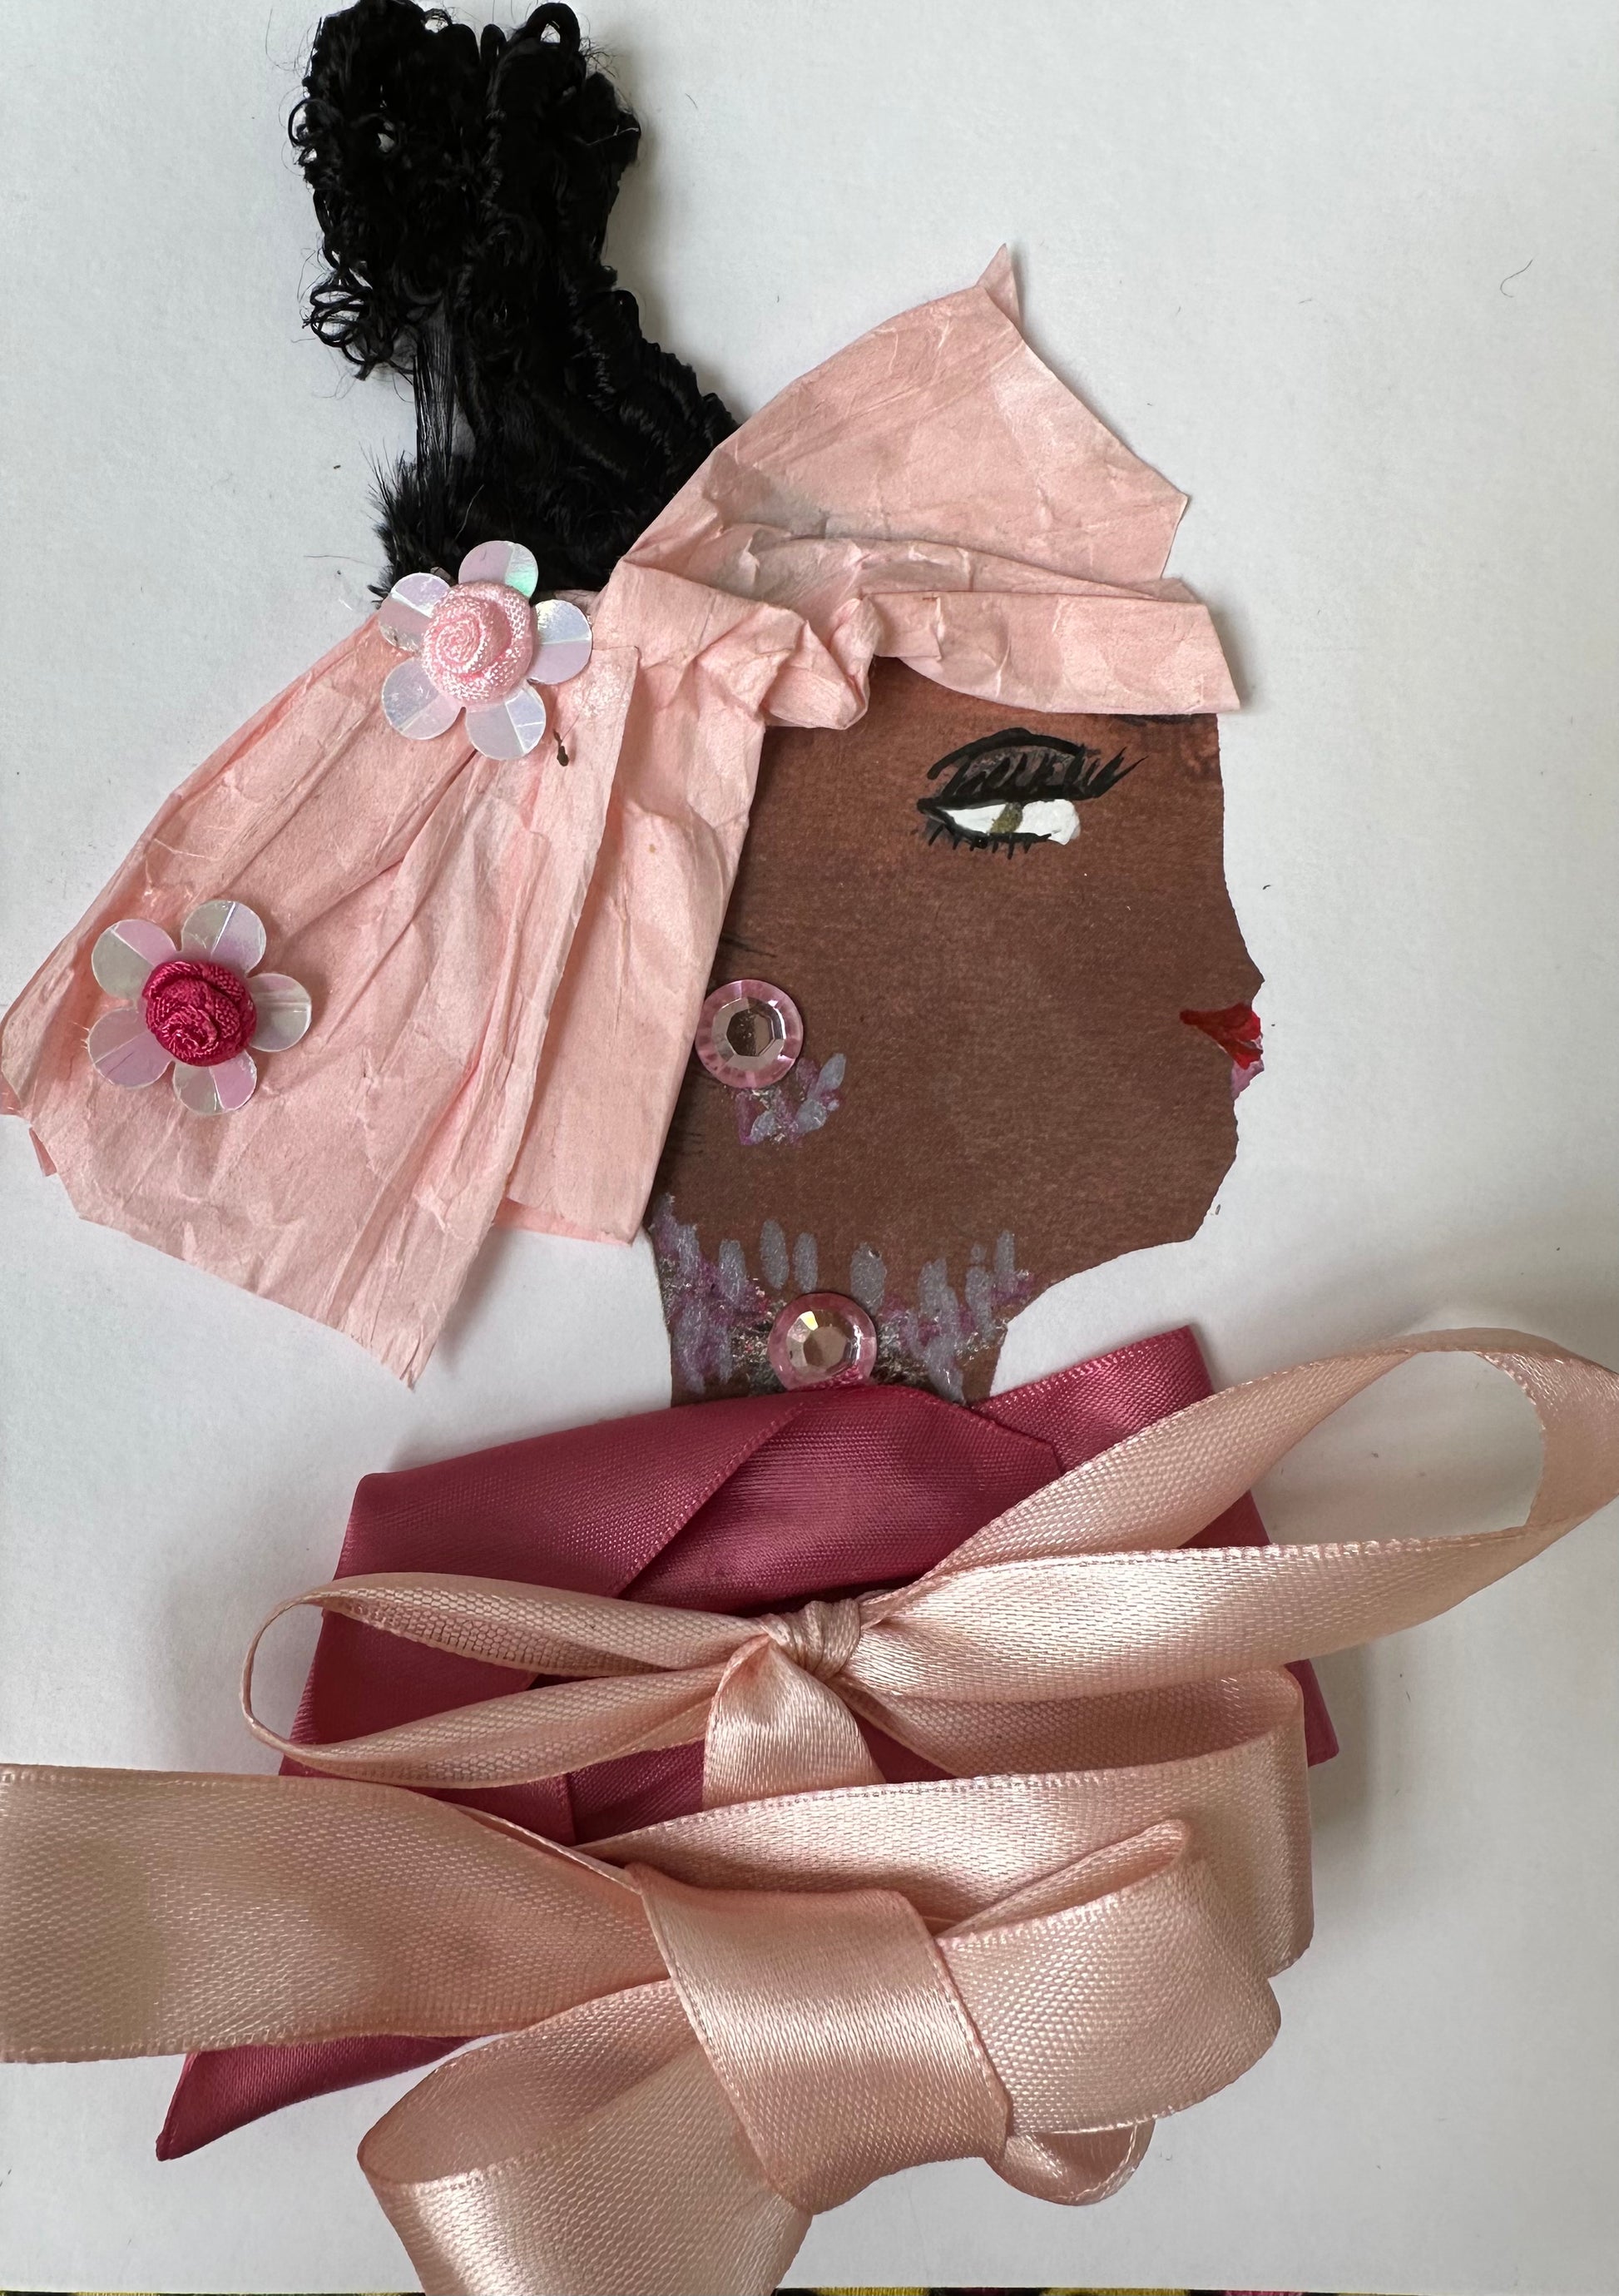 I designed this handmade card of a black woman dressed in a blouse that is composed of two light pink bows. Her hatinator is a light pink, bow-like shape with two flowers, and she has gemstones has jewellery. 